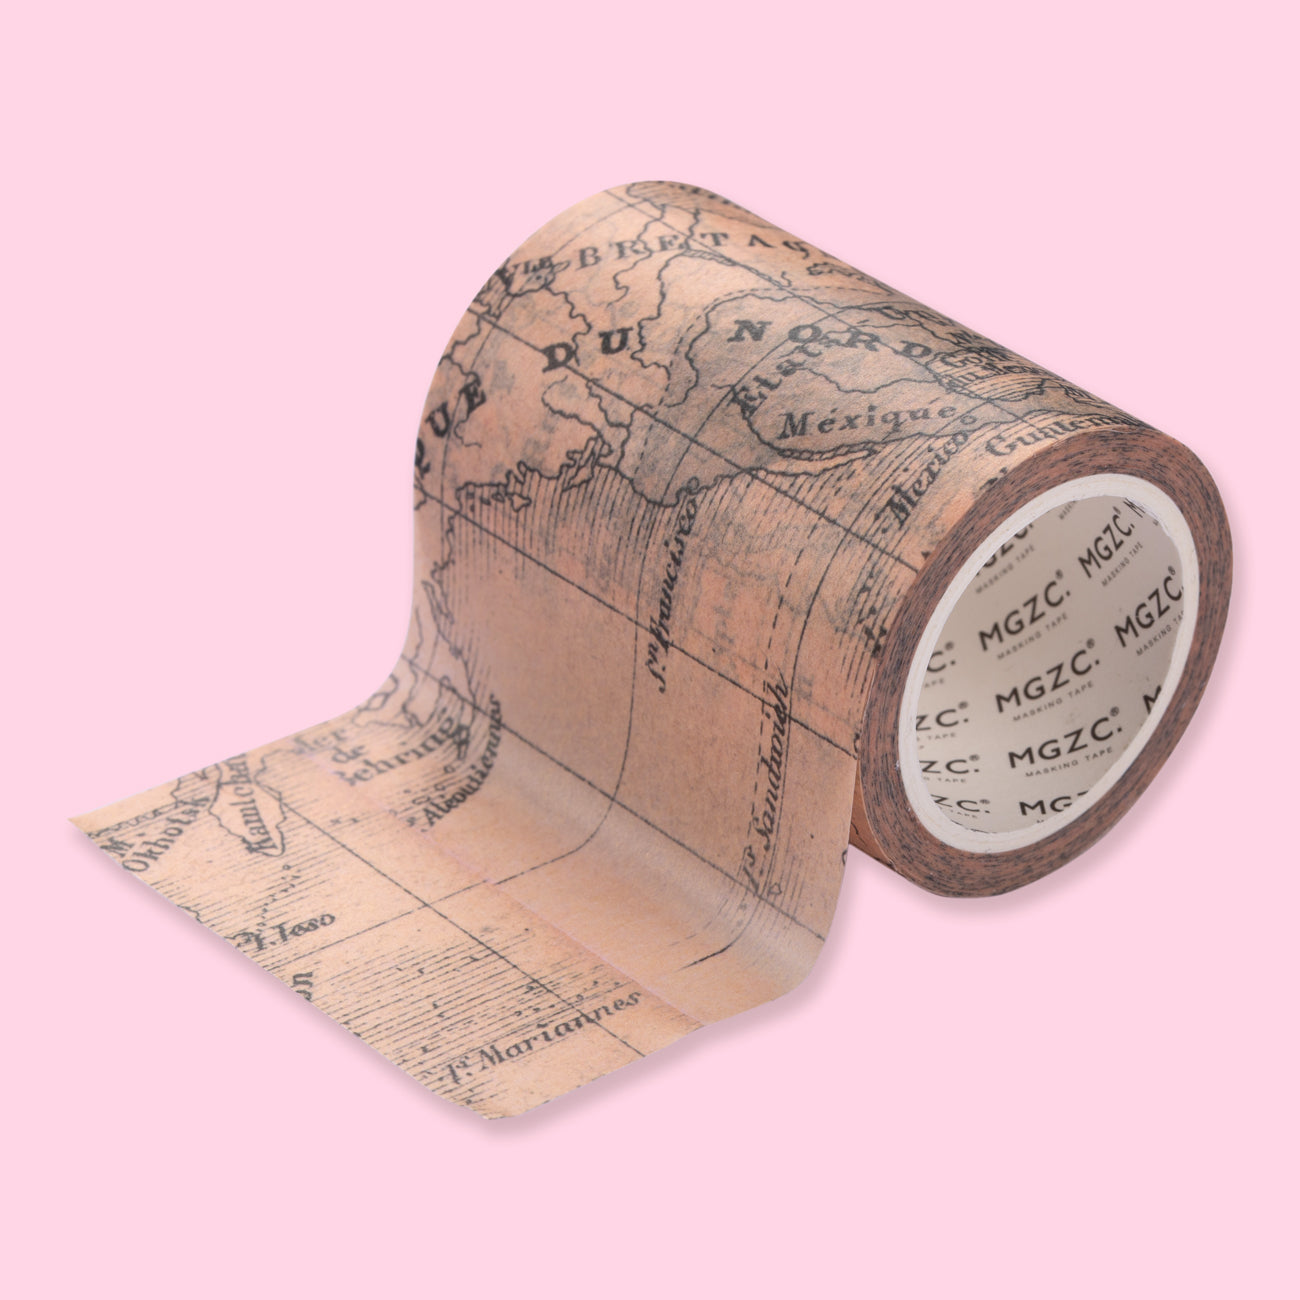 Vintage World Map Washi Tape - Wide 60mm x 8m - Collage Gift Wrap